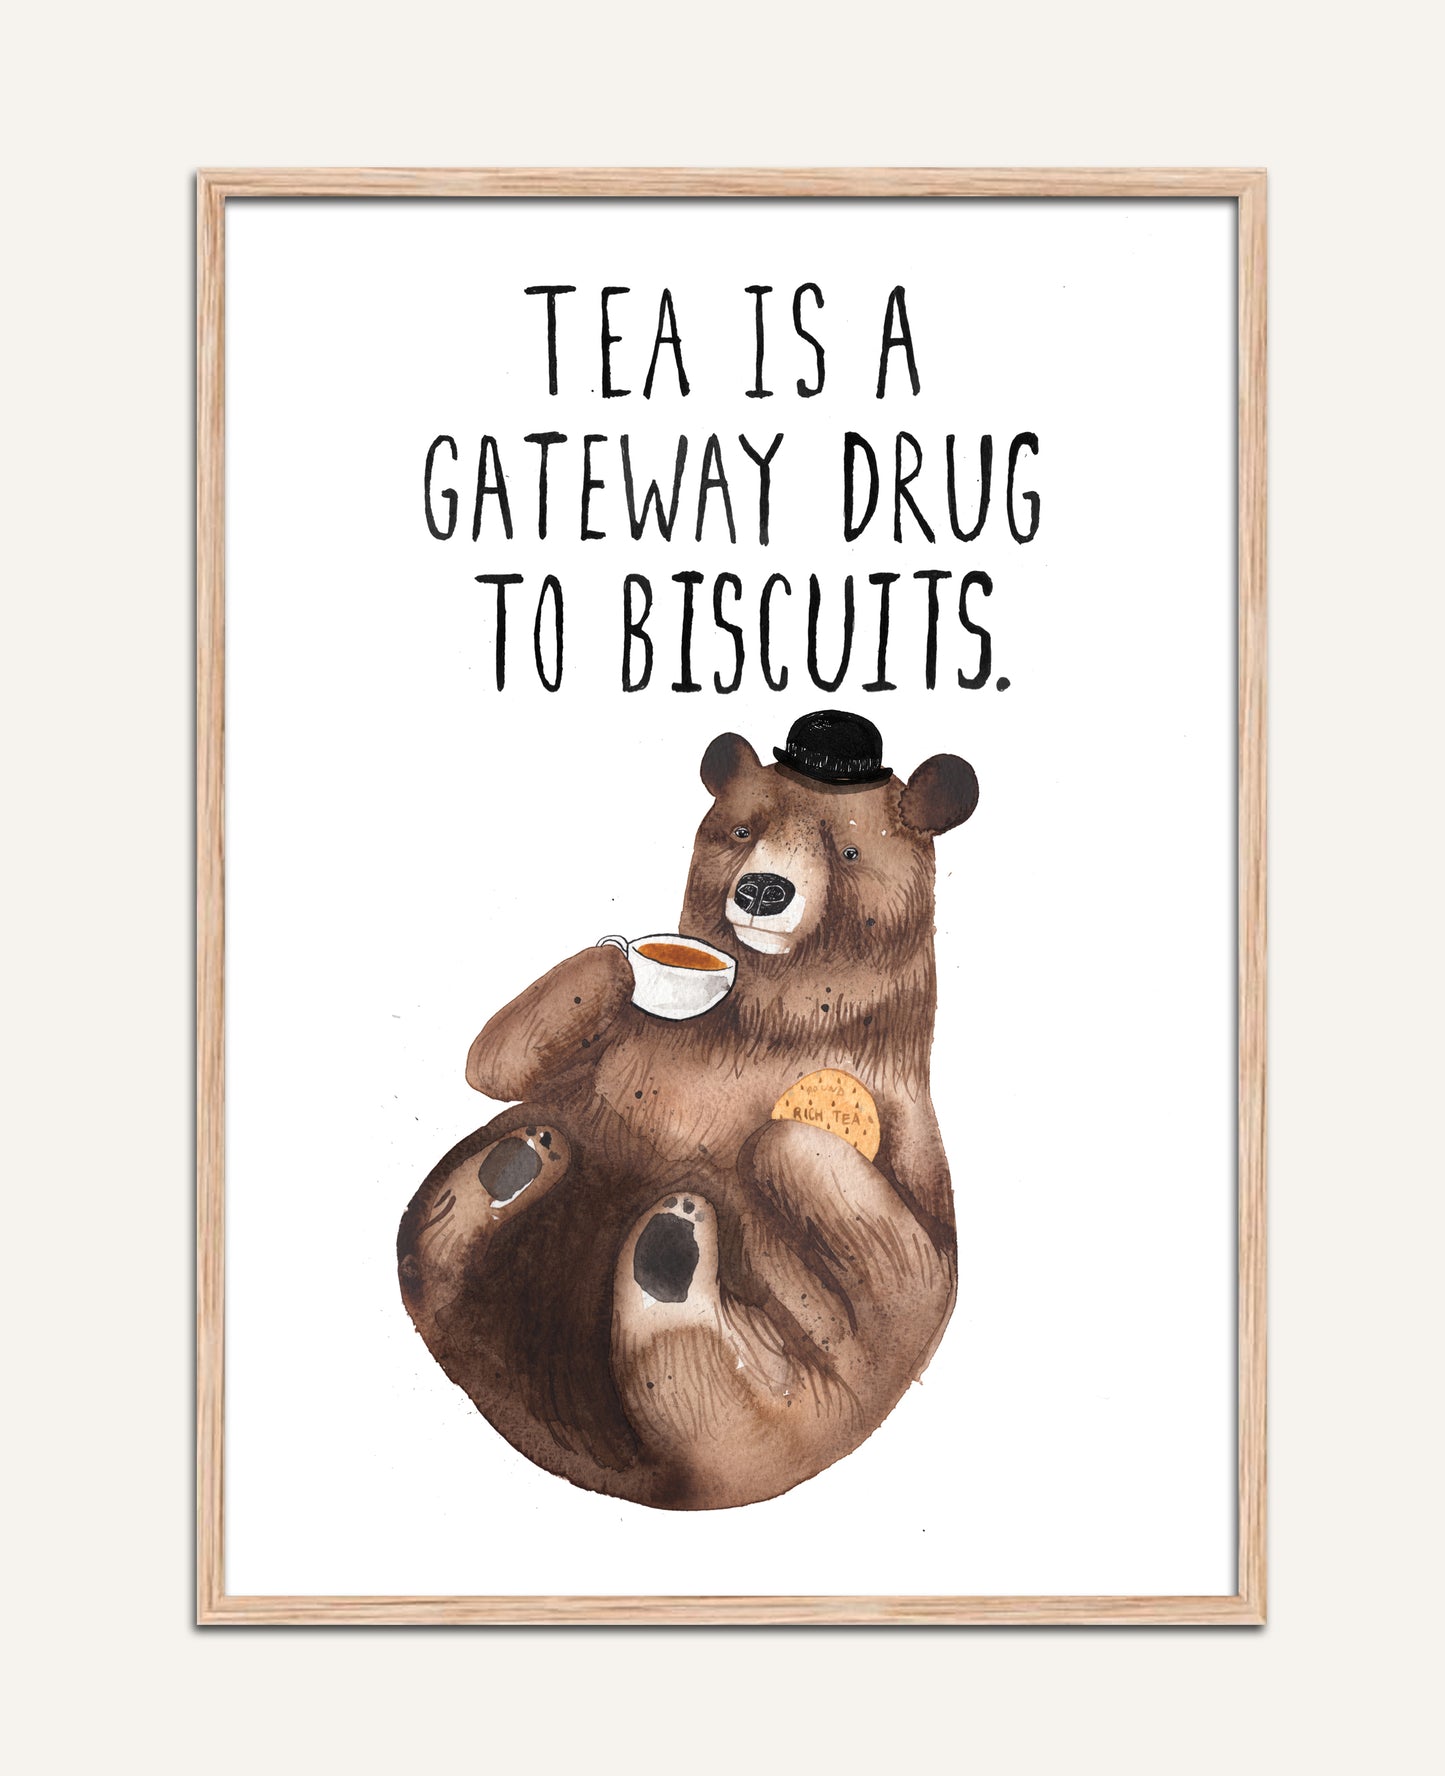 TEA AND BISCUITS